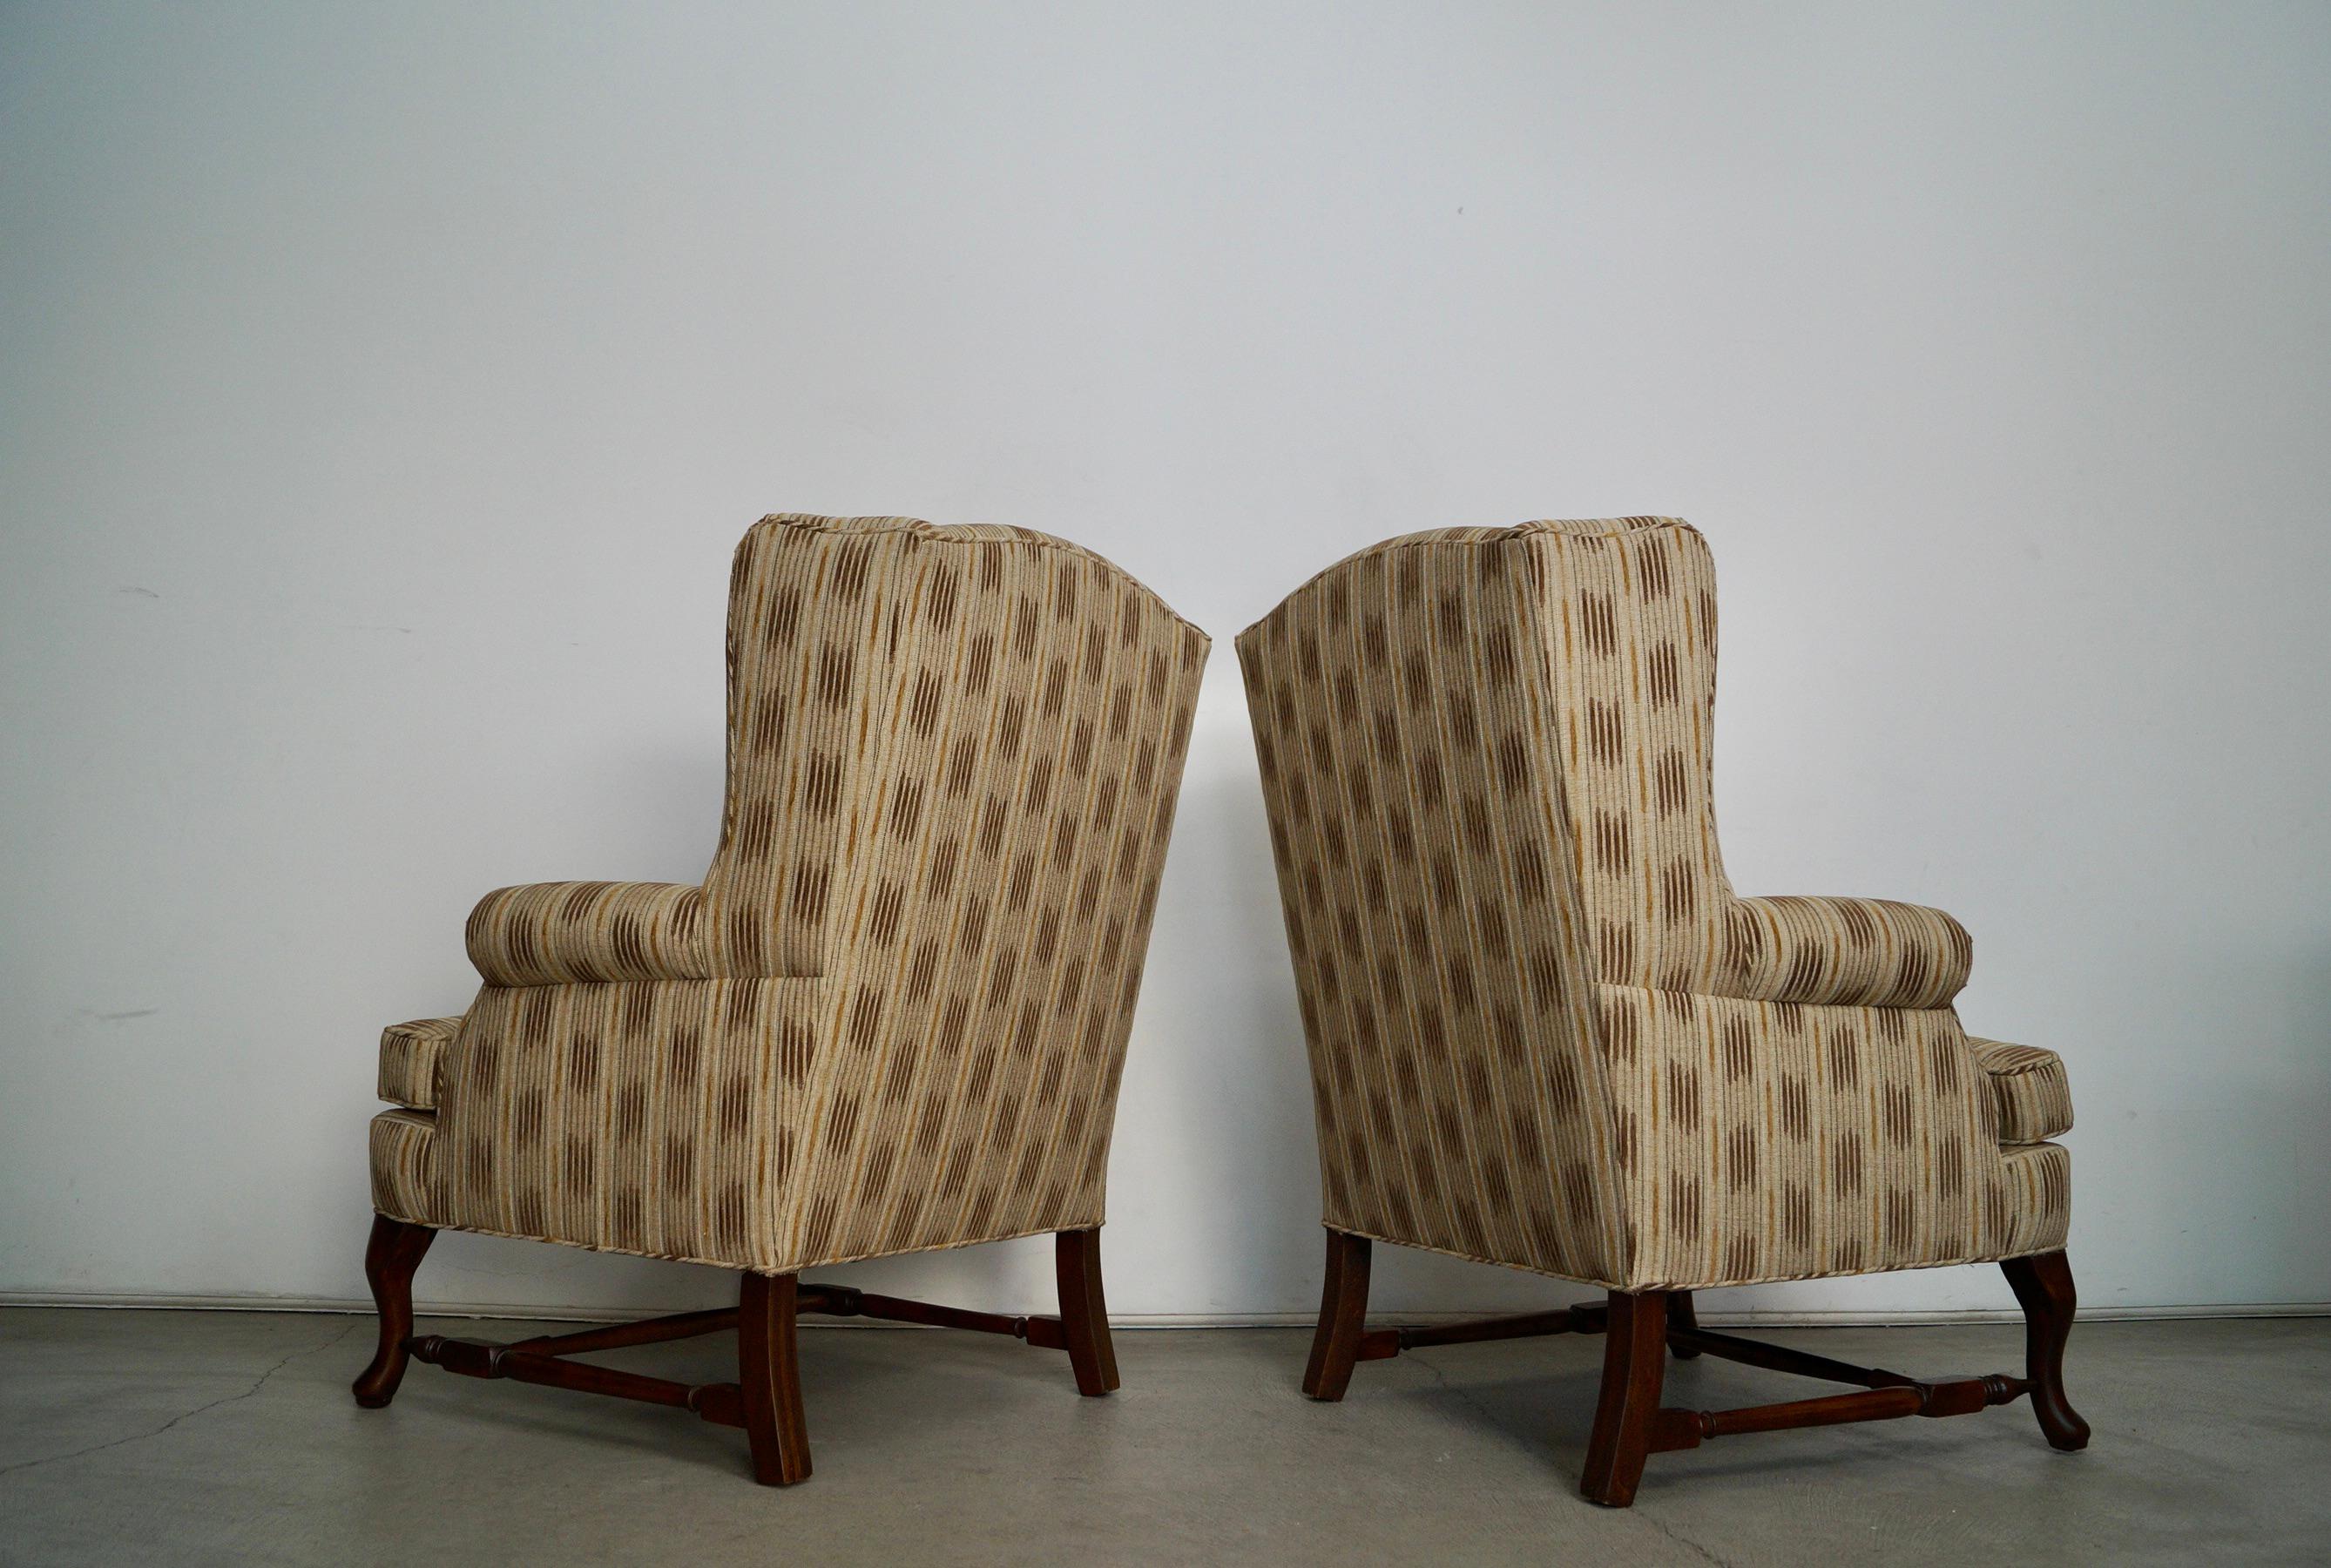 1970's Wingback Chairs Refinished & Reupholstered - a Pair In Excellent Condition For Sale In Burbank, CA